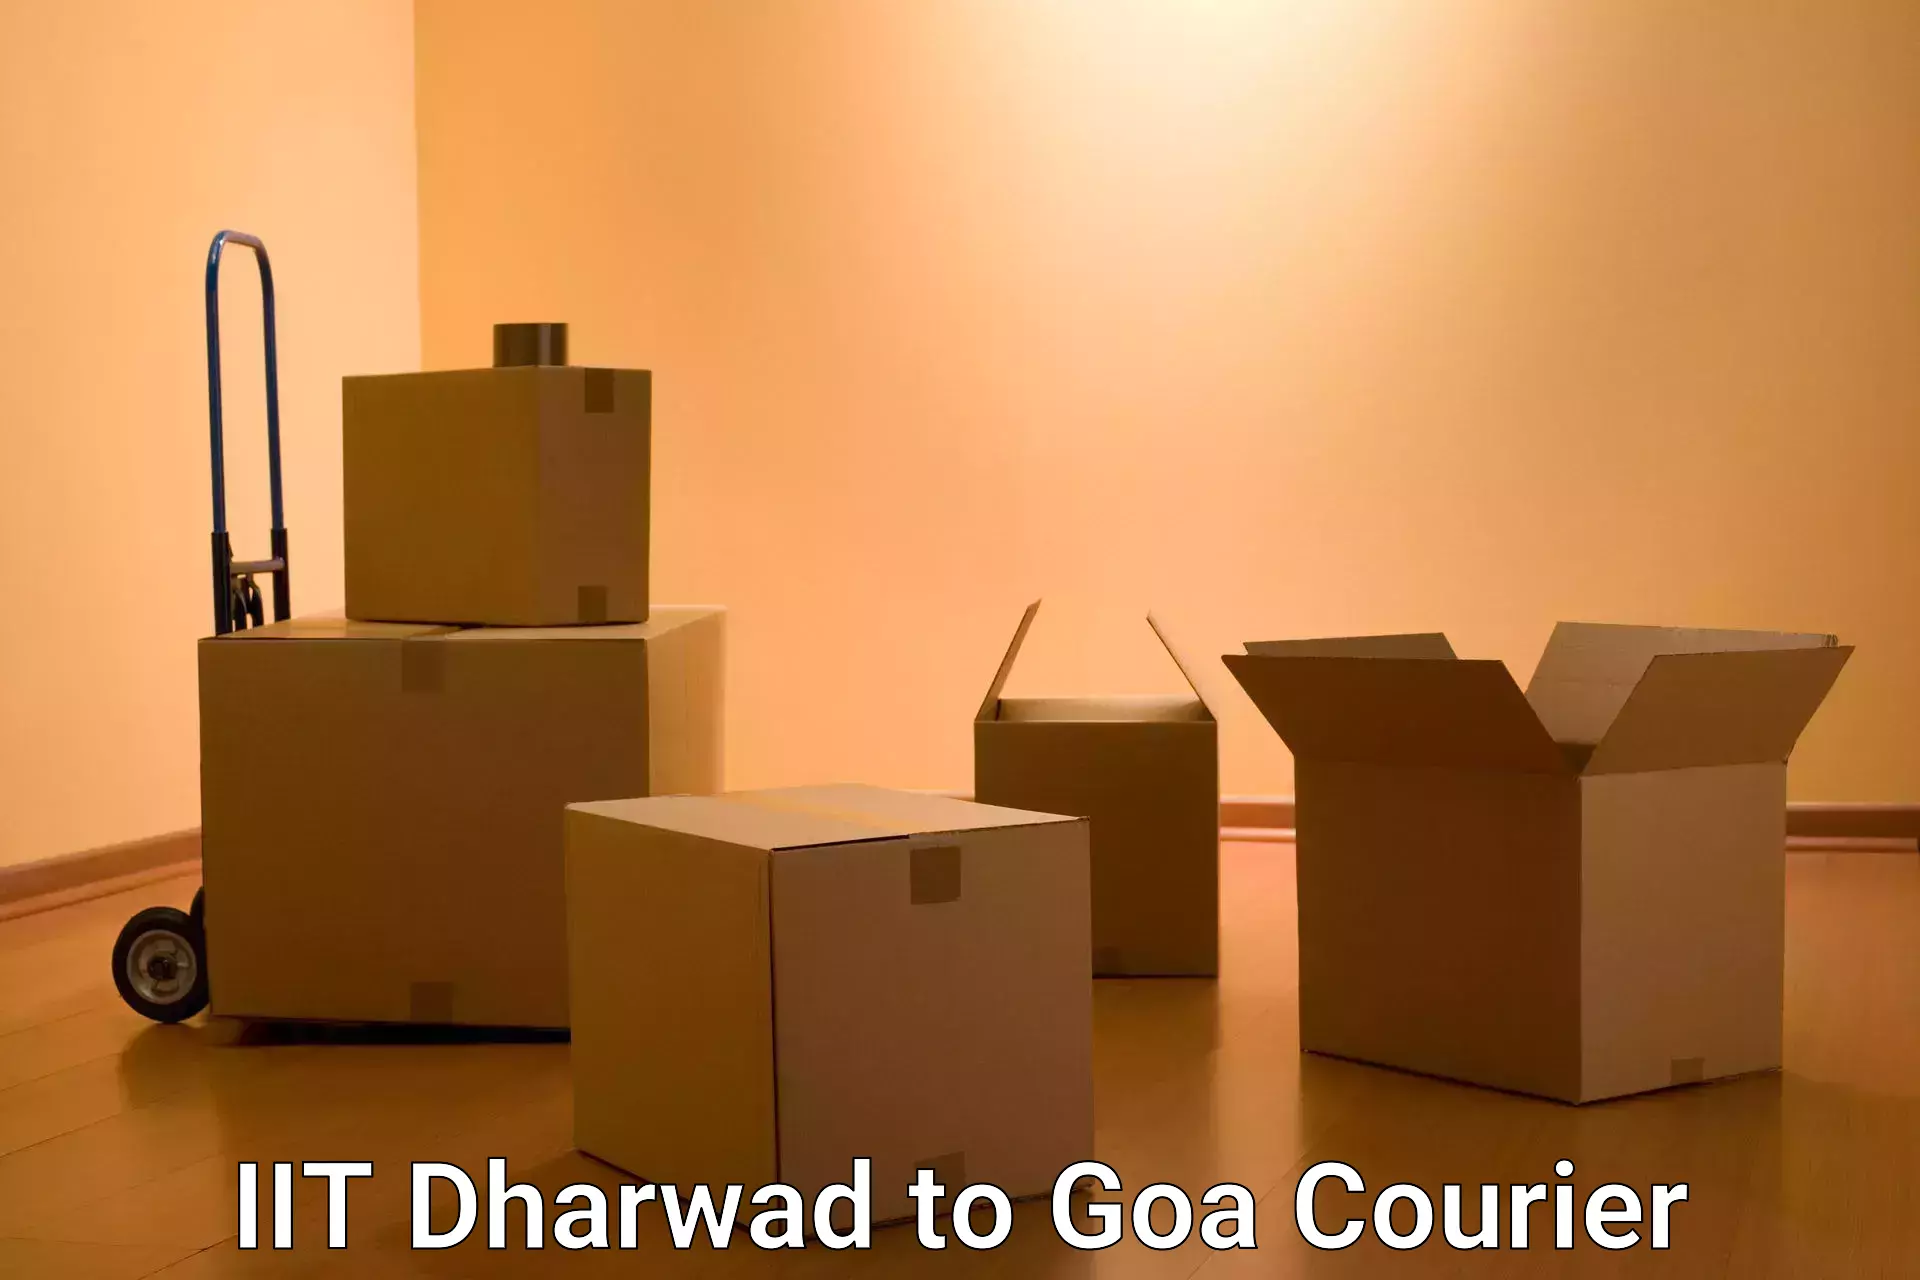 24-hour courier service IIT Dharwad to Goa